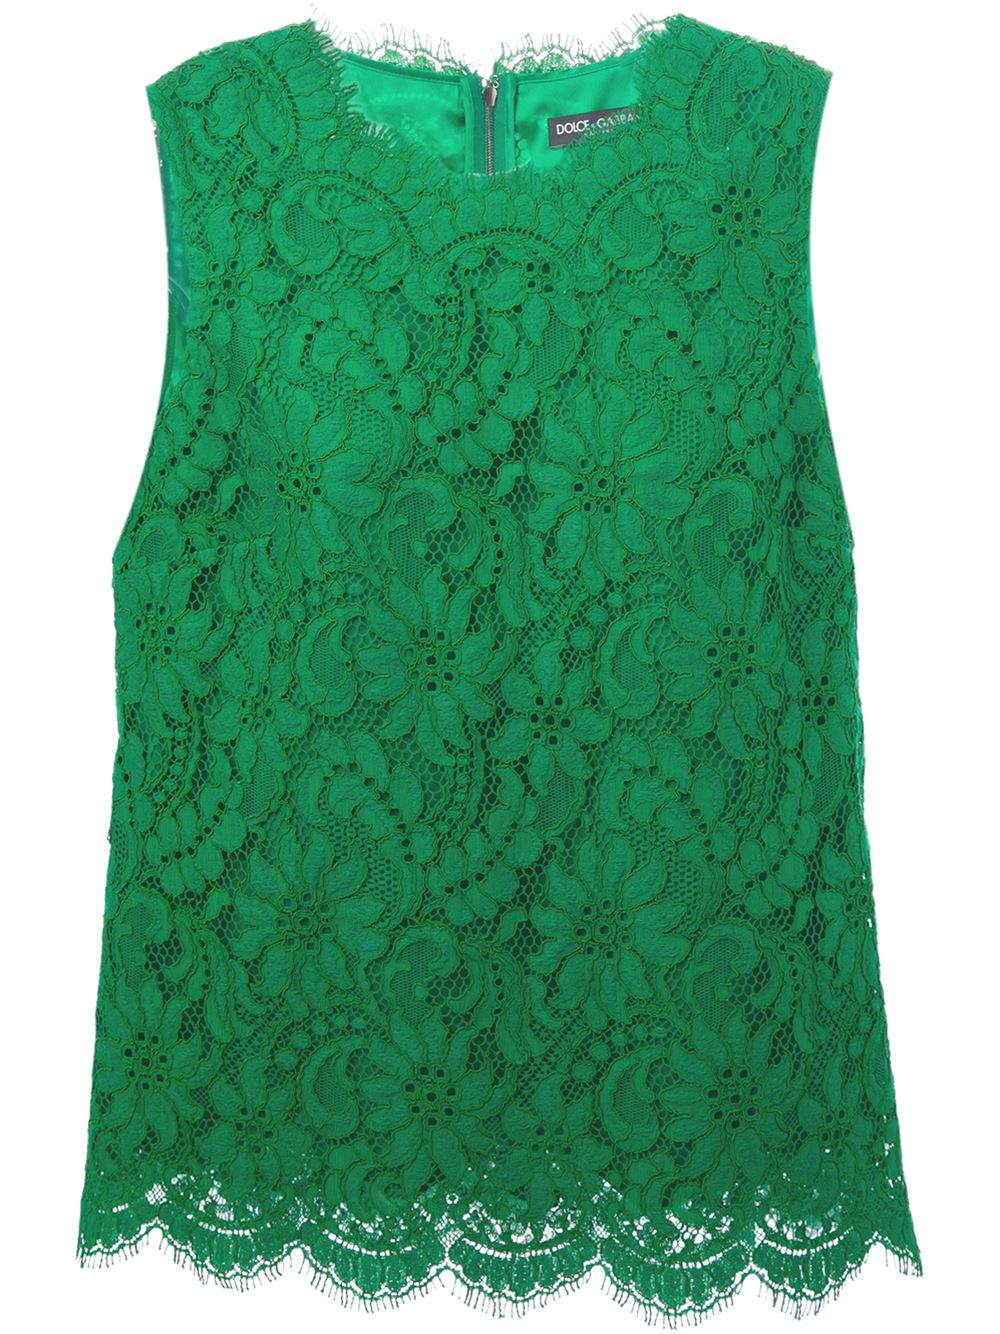 Lyst - Dolce & Gabbana Floral Lace Sleeveless Blouse in Green